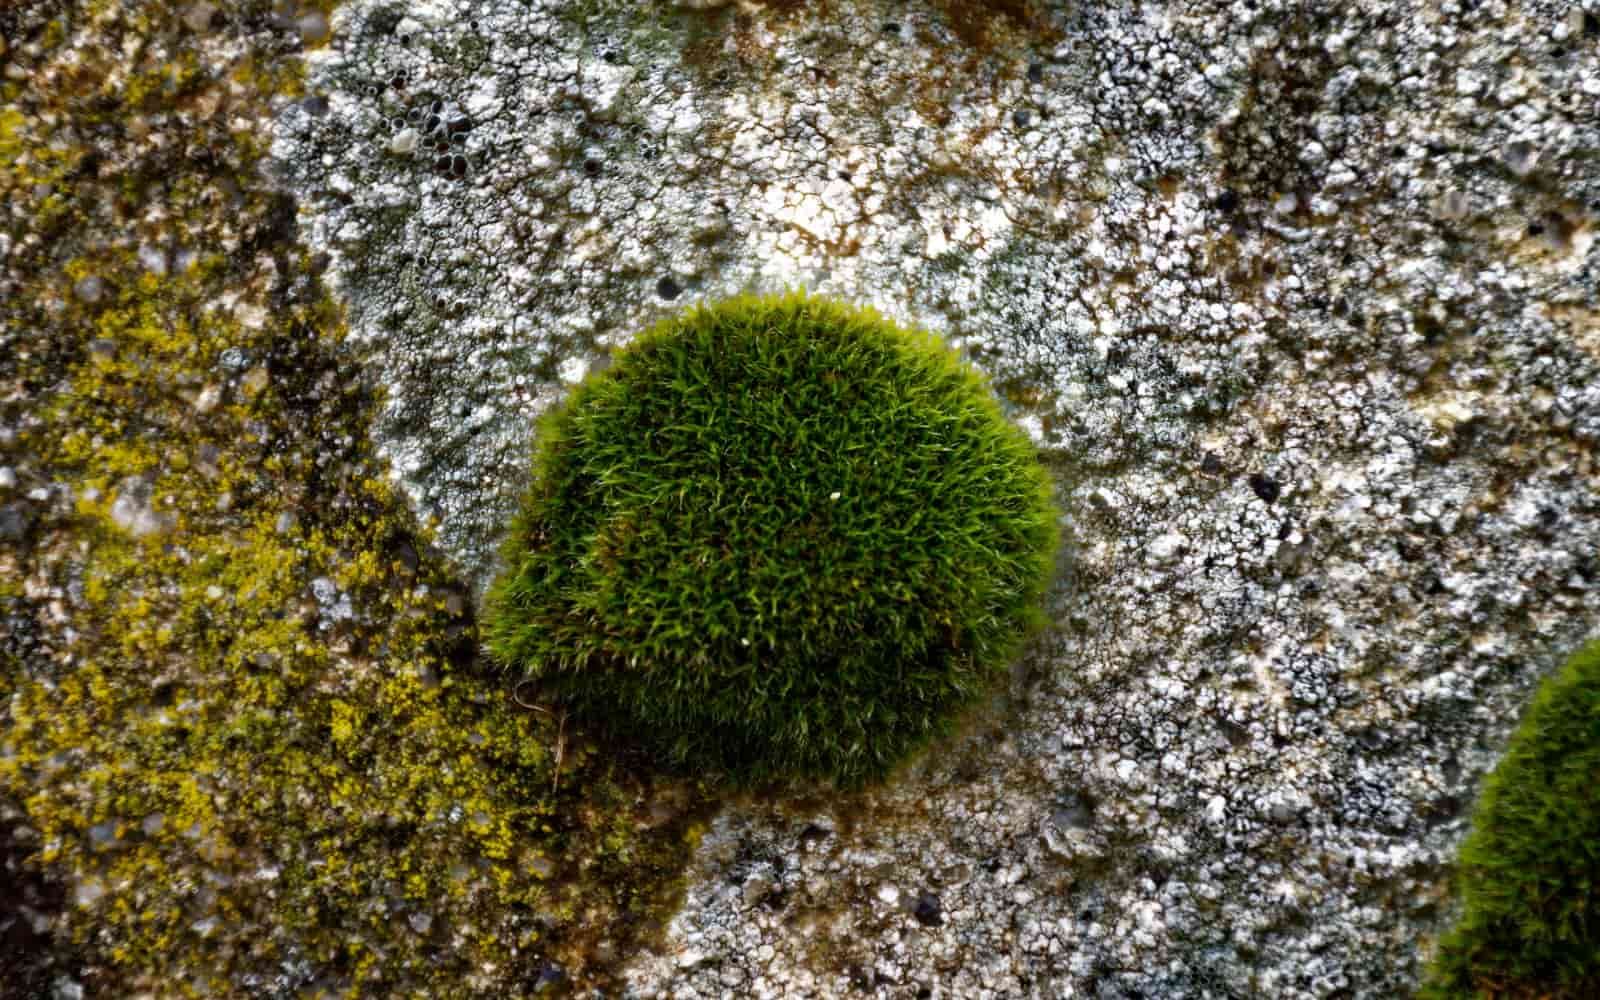 Cladophora Moss Ball in Water